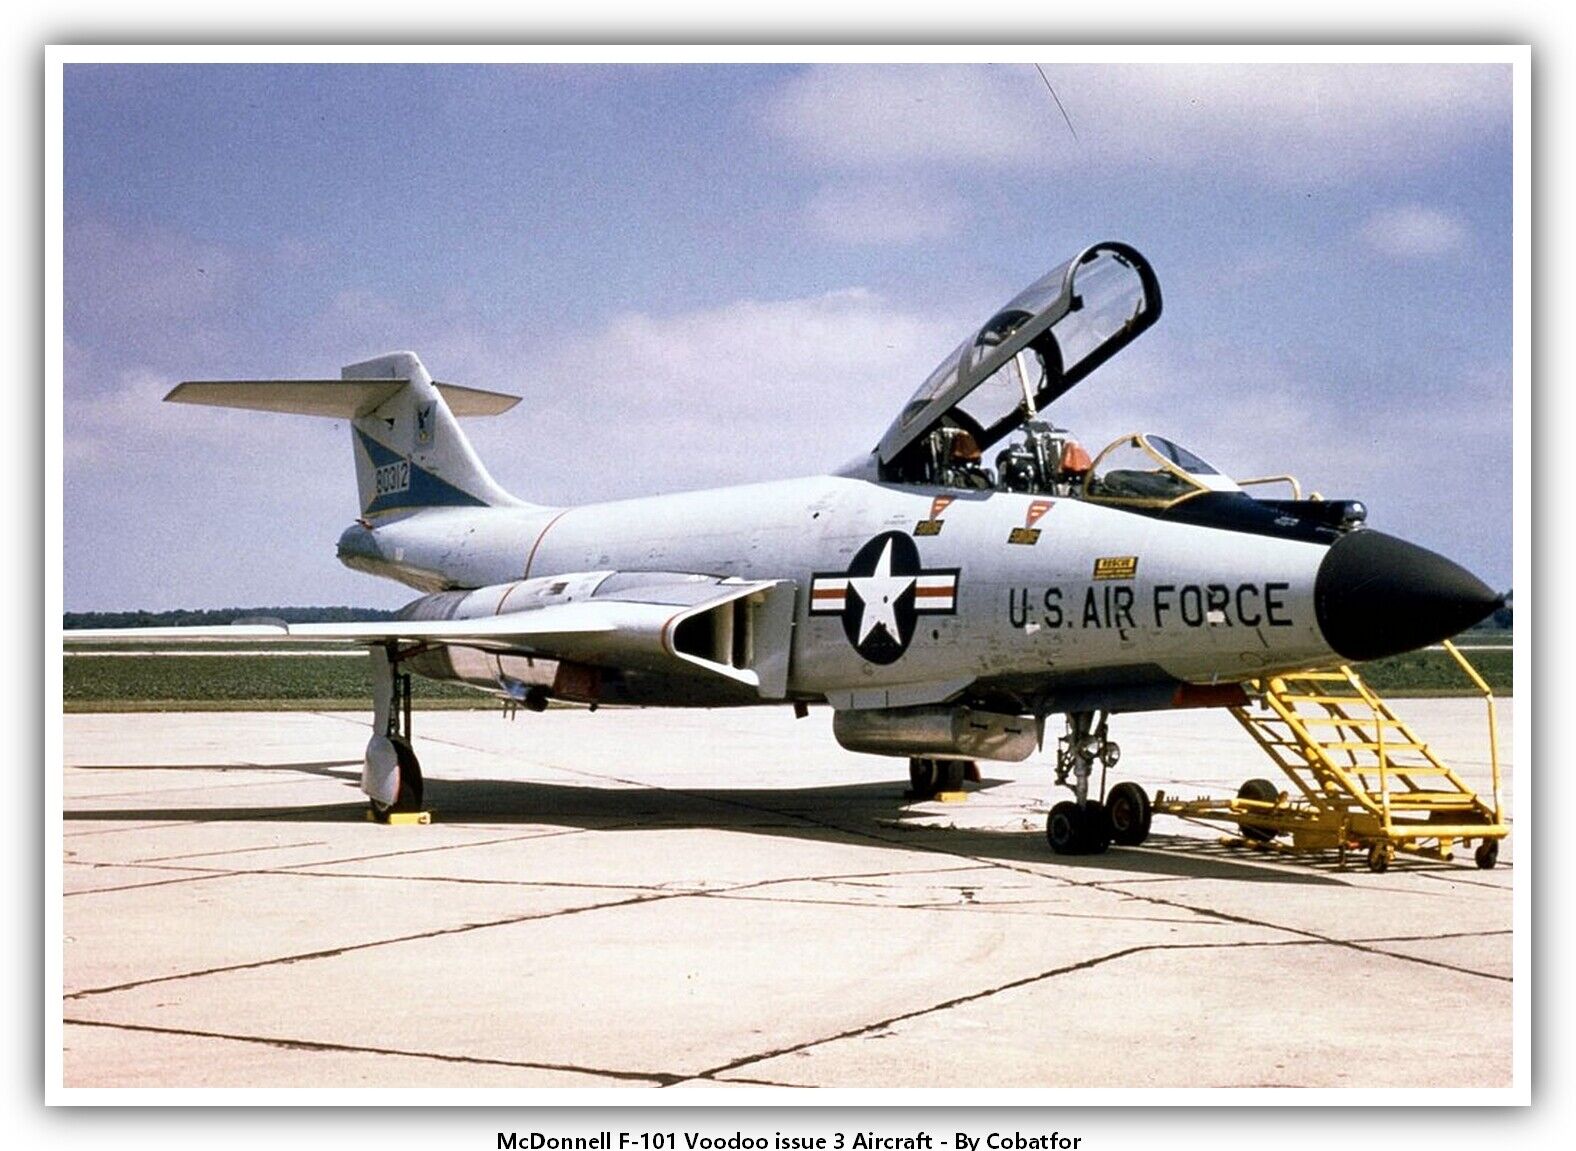 McDonnell F-101 Voodoo issue 3 Aircraft